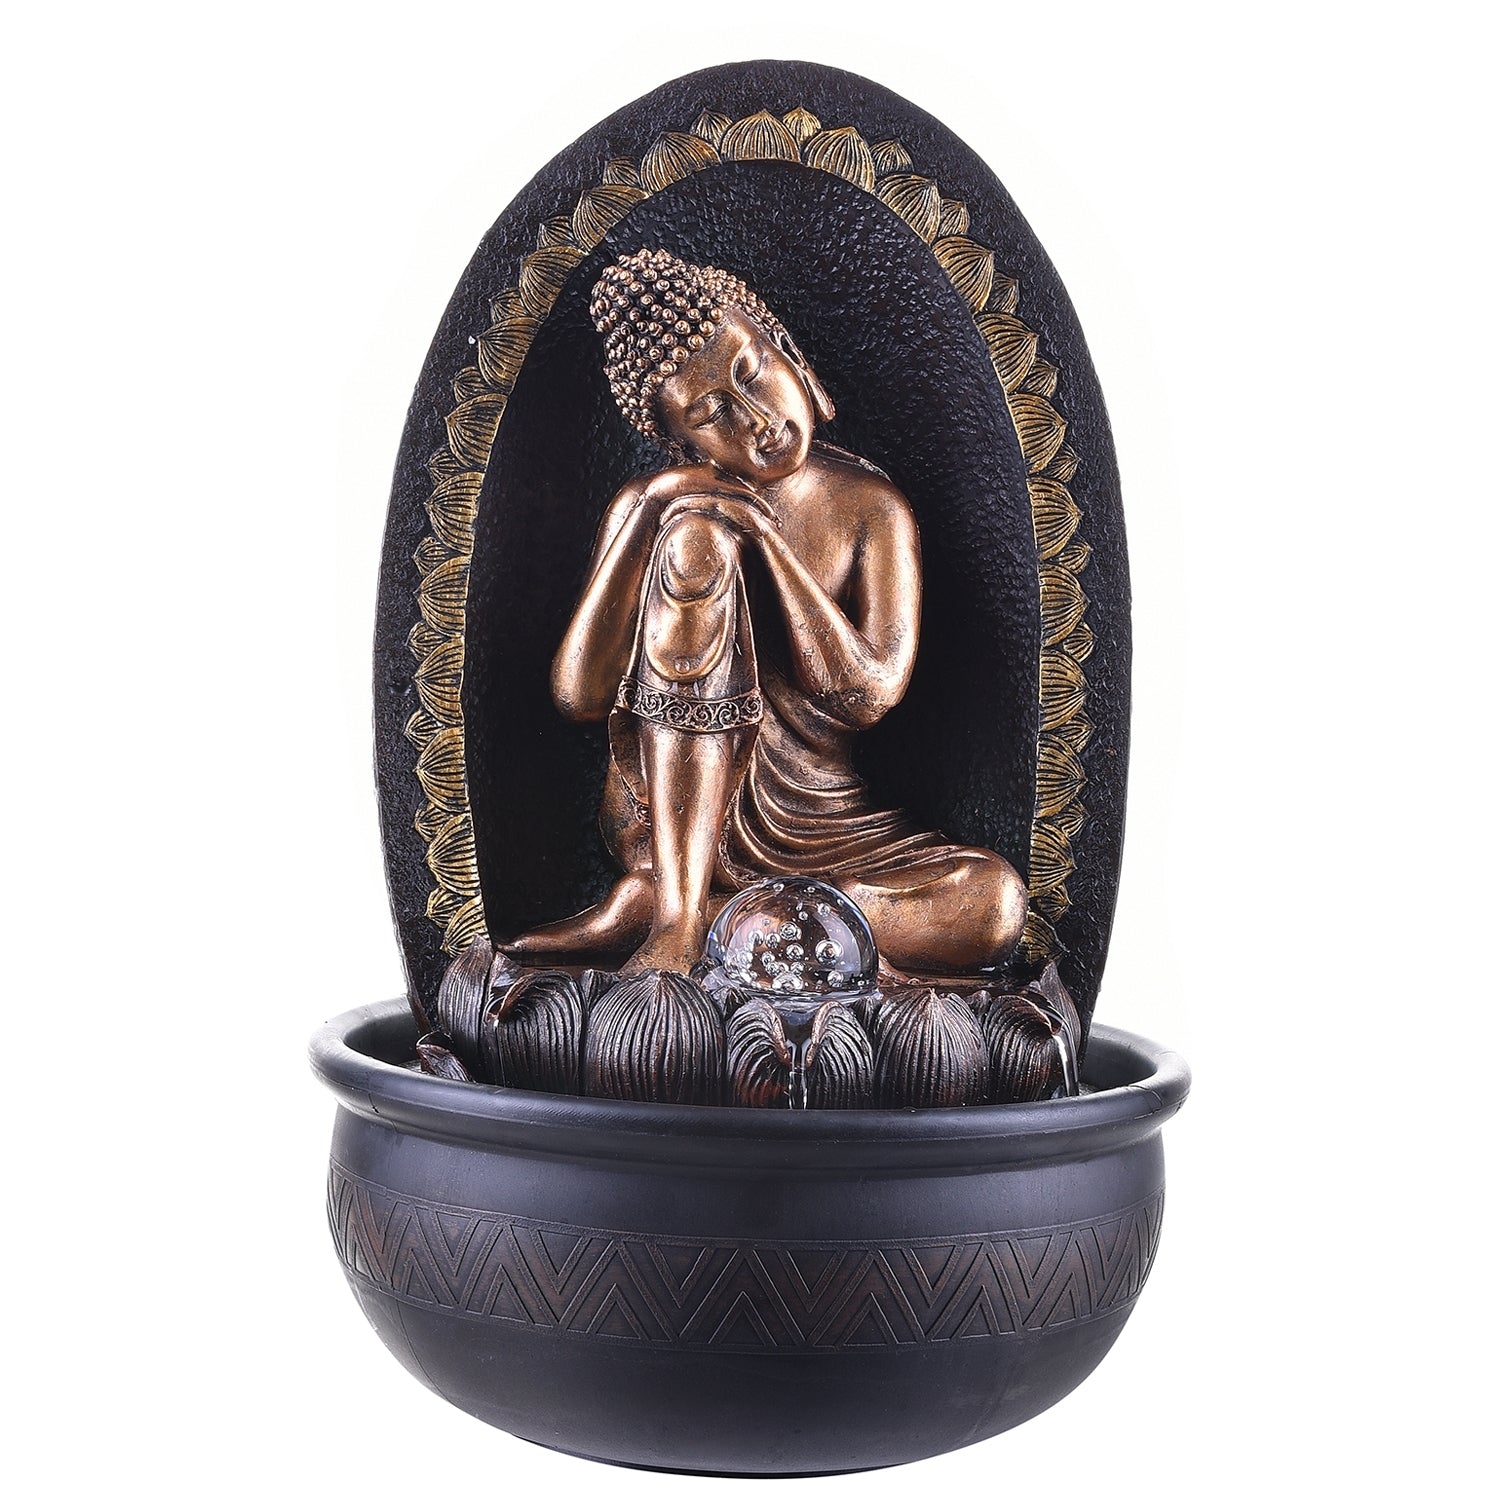 Polystone Brown and Golden Buddha On Knee Statue Water Fountain With Crystal Ball for Home/Office Decor 4